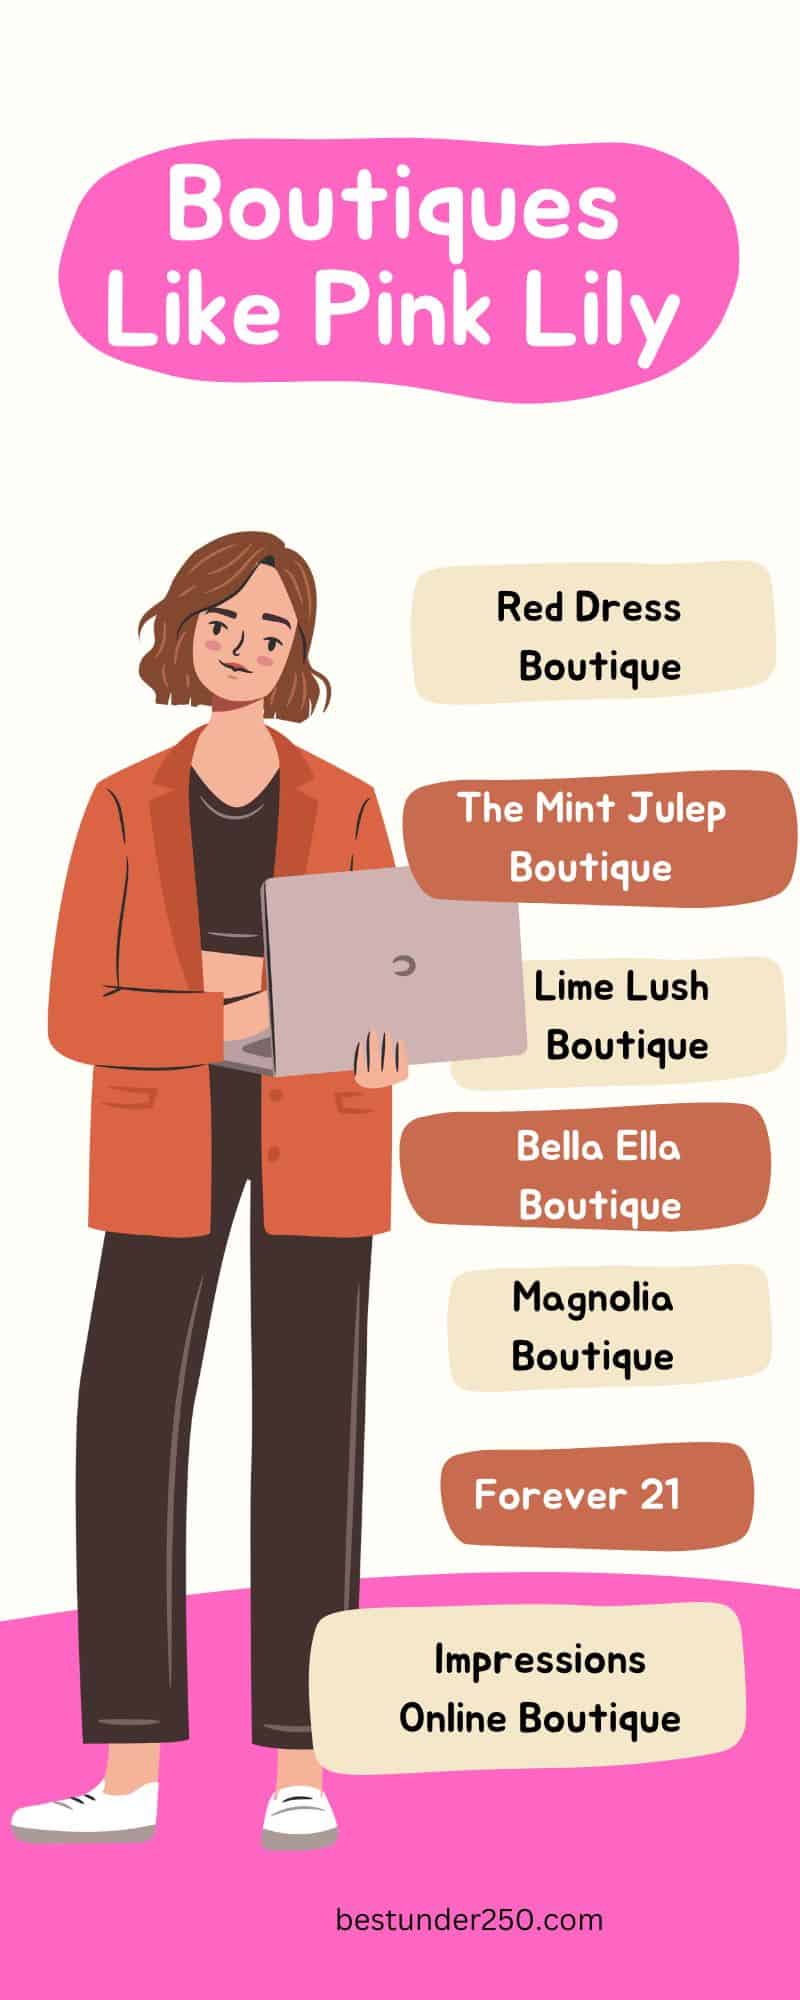 Infographic - Pink Lily Boutiques Alternatives